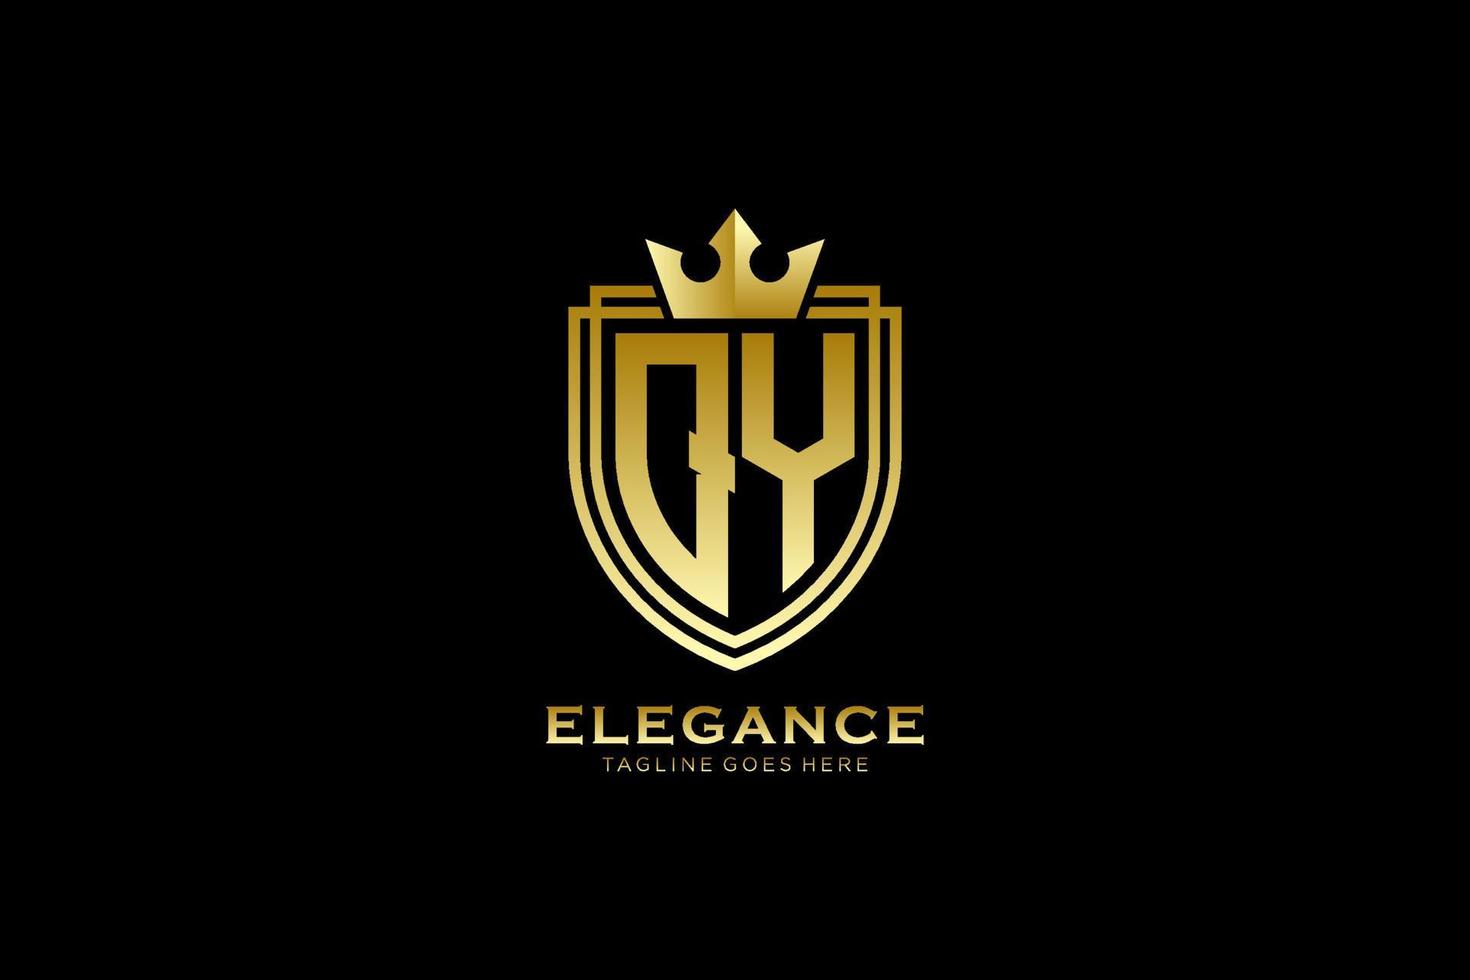 initial QY elegant luxury monogram logo or badge template with scrolls and royal crown - perfect for luxurious branding projects vector